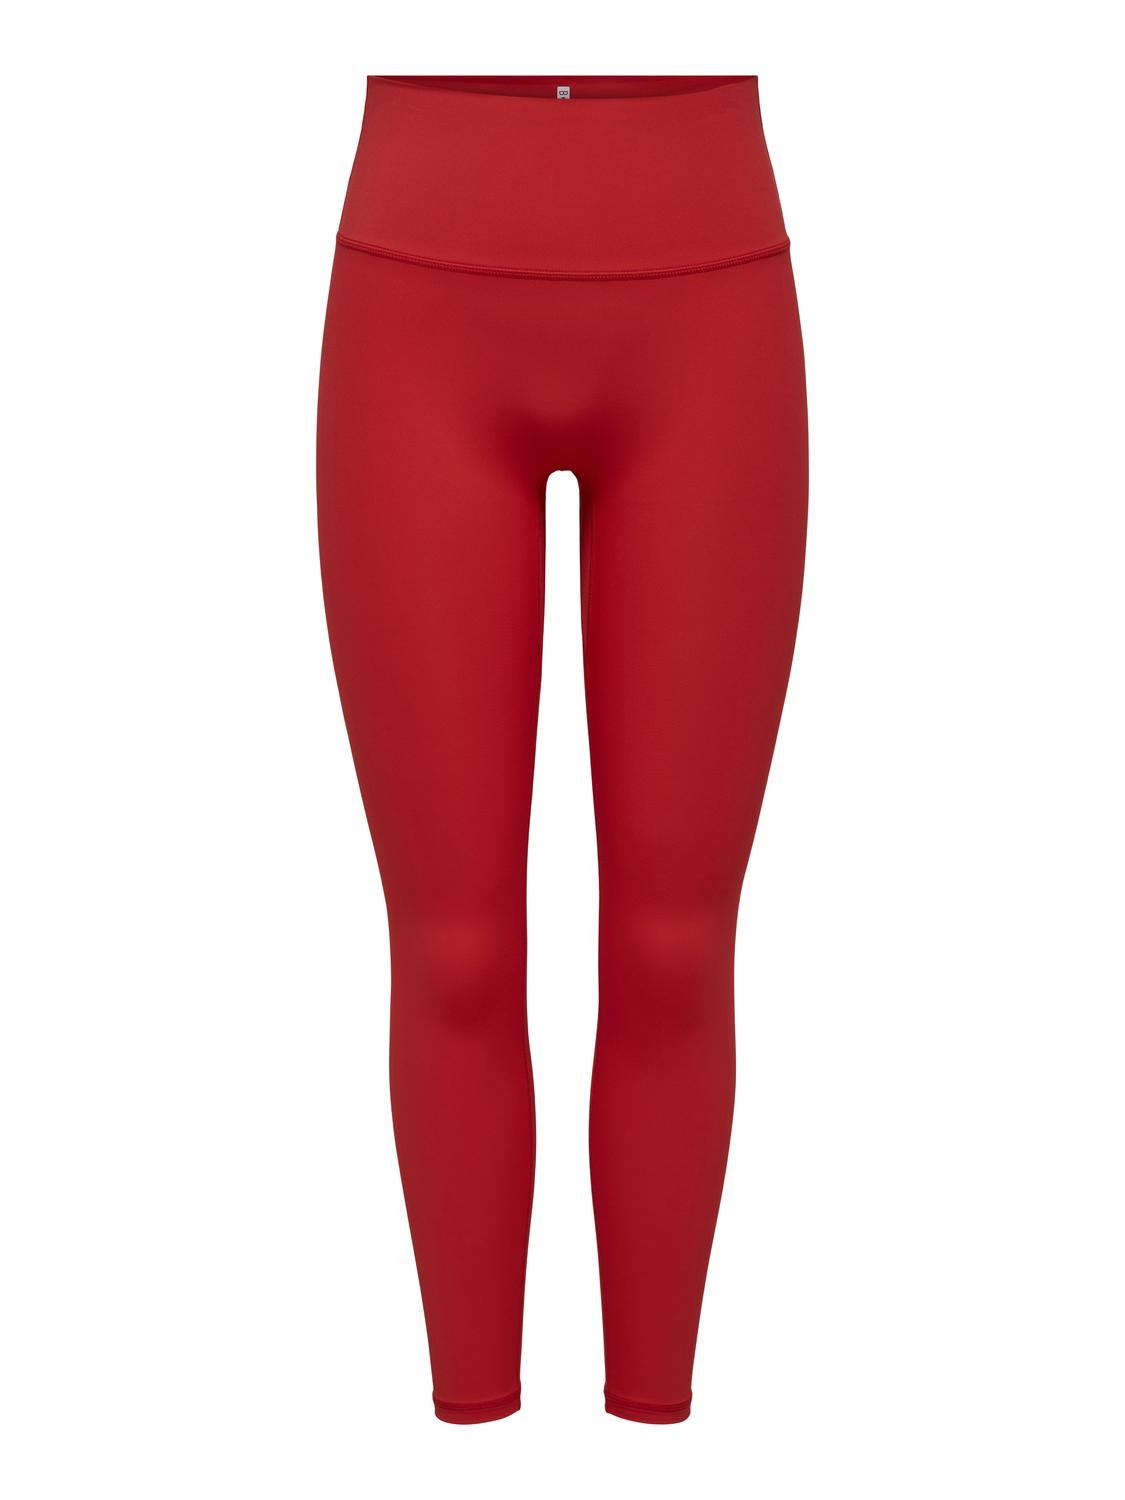 ONLY Tight Fit Super-high waist Leggings -Mars Red - 15303178